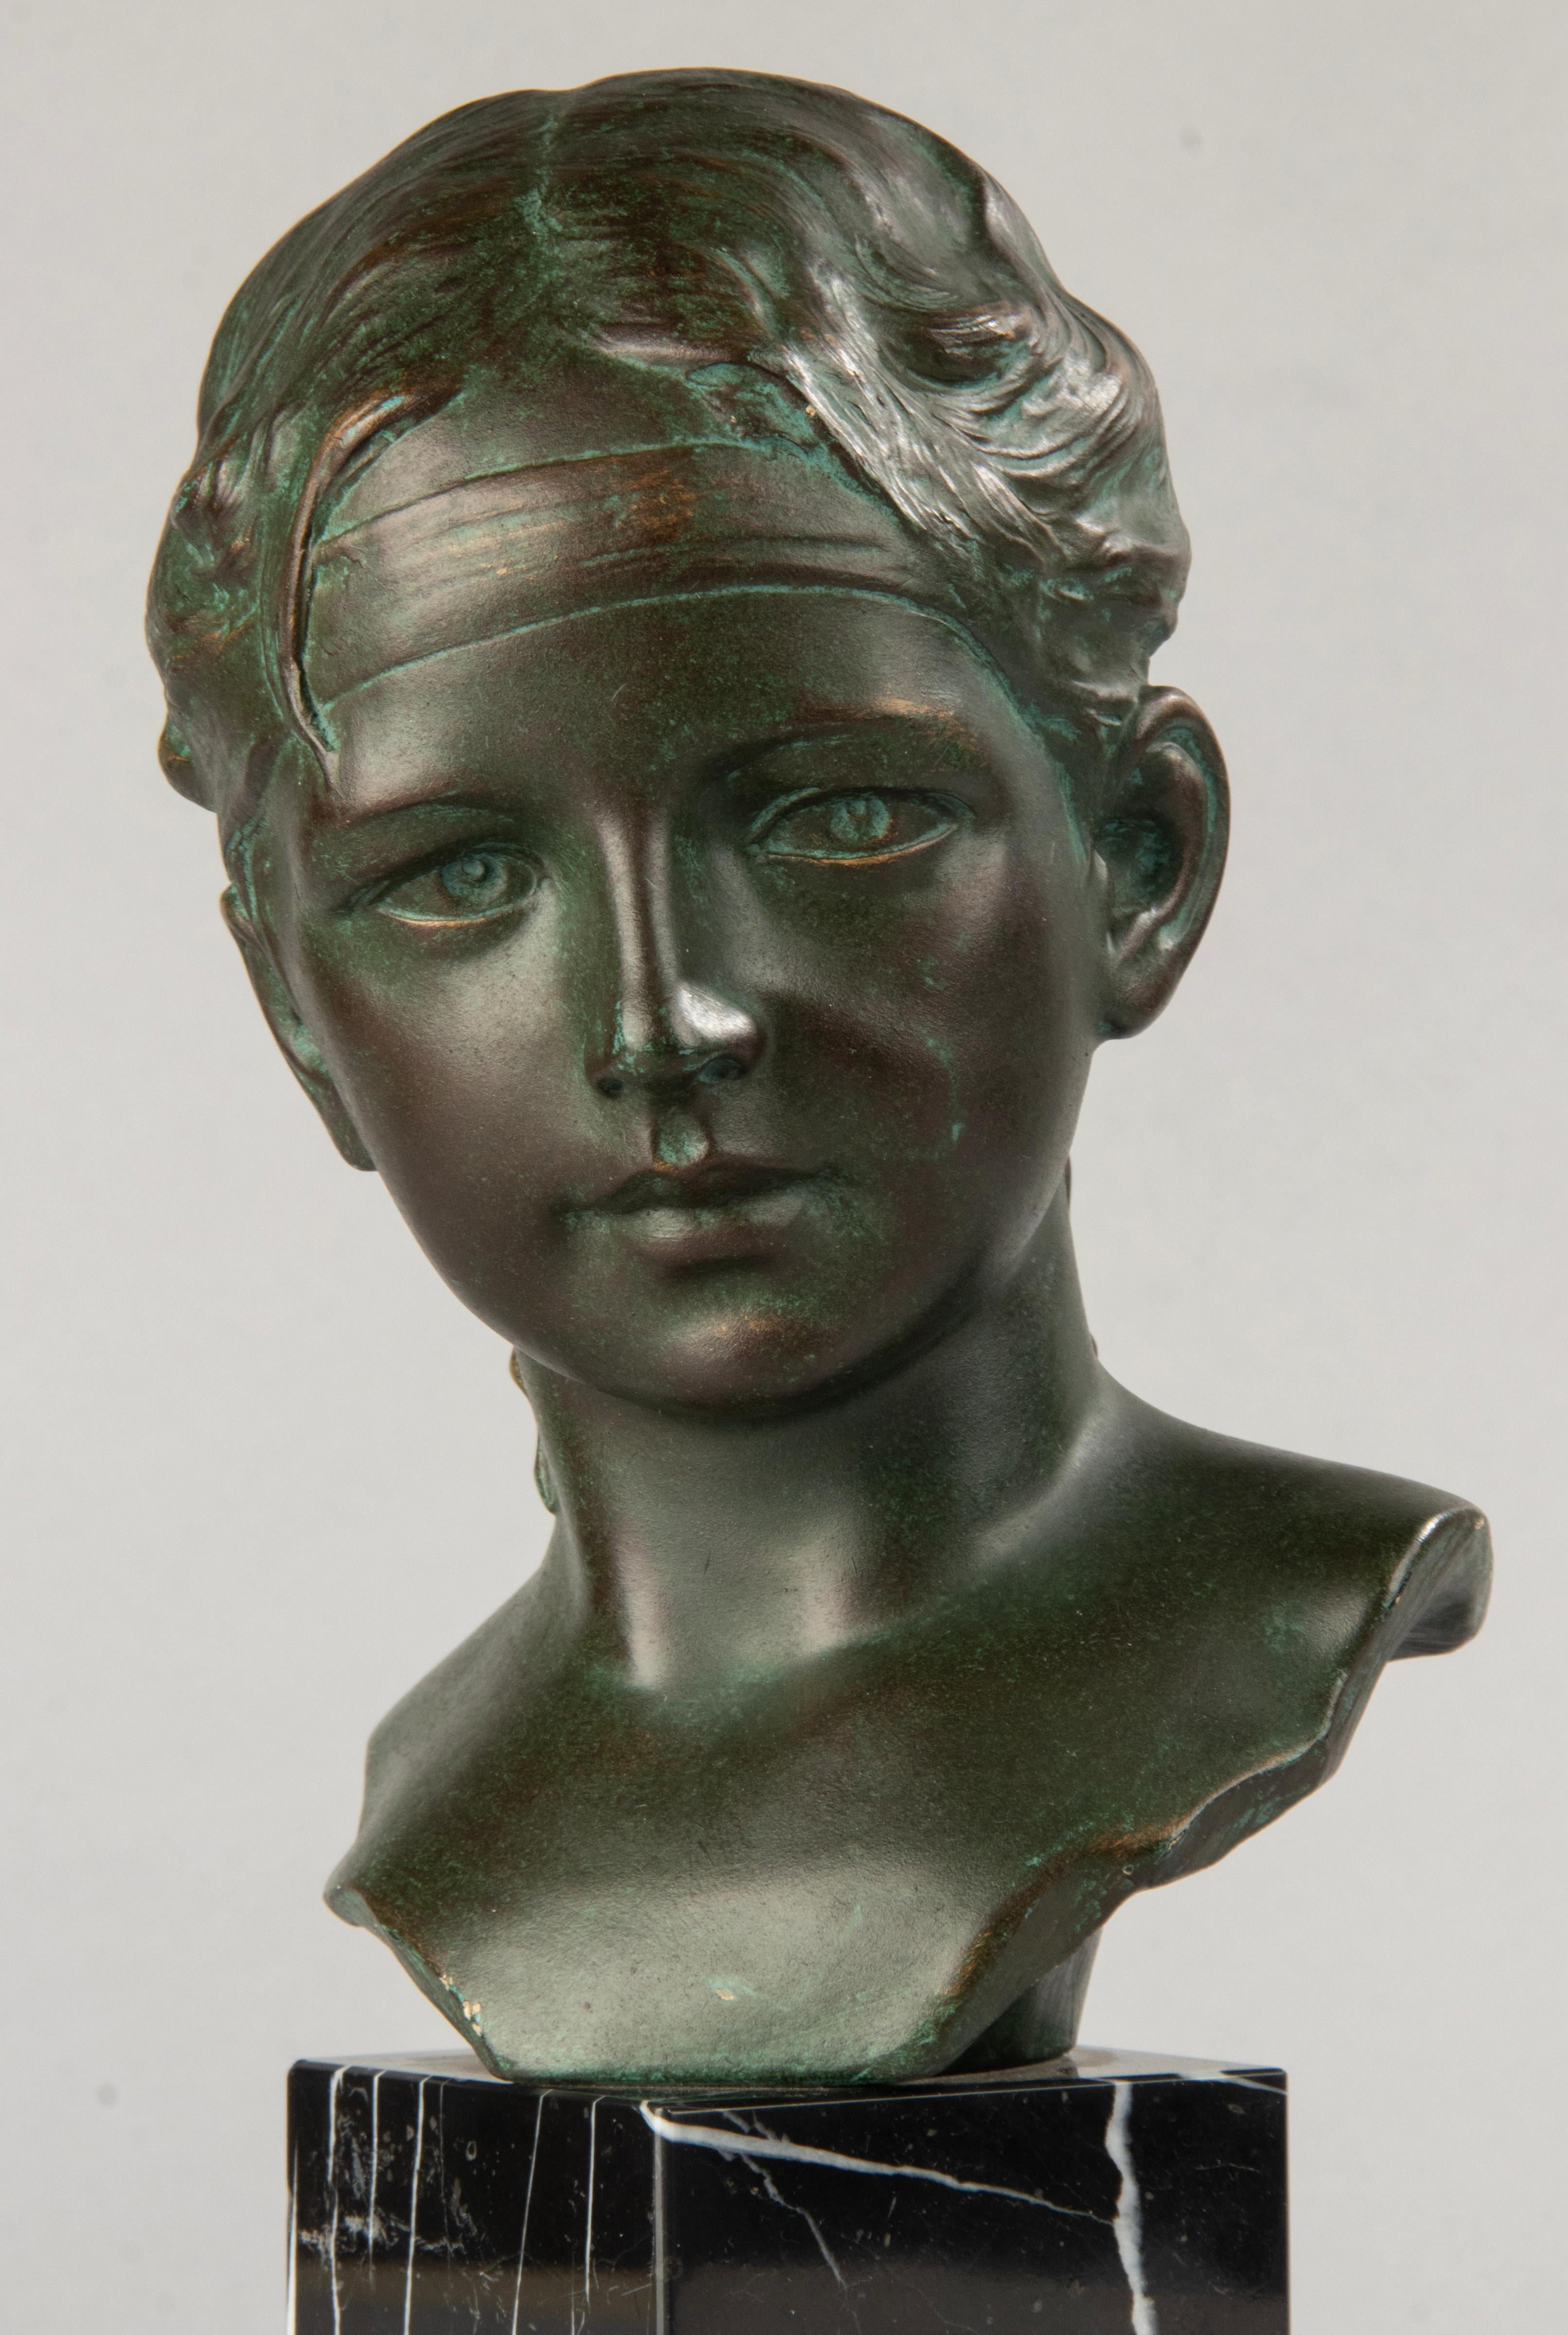 An Art Deco sculpture of a young girl, made of plaster. With a beautiful green patina. On a black Belgian marble pedestal. In a good and original condition. Made in Belgium, circa 1920-1930 by the Italian sculptor Giuseppe Carli.

The Carli family